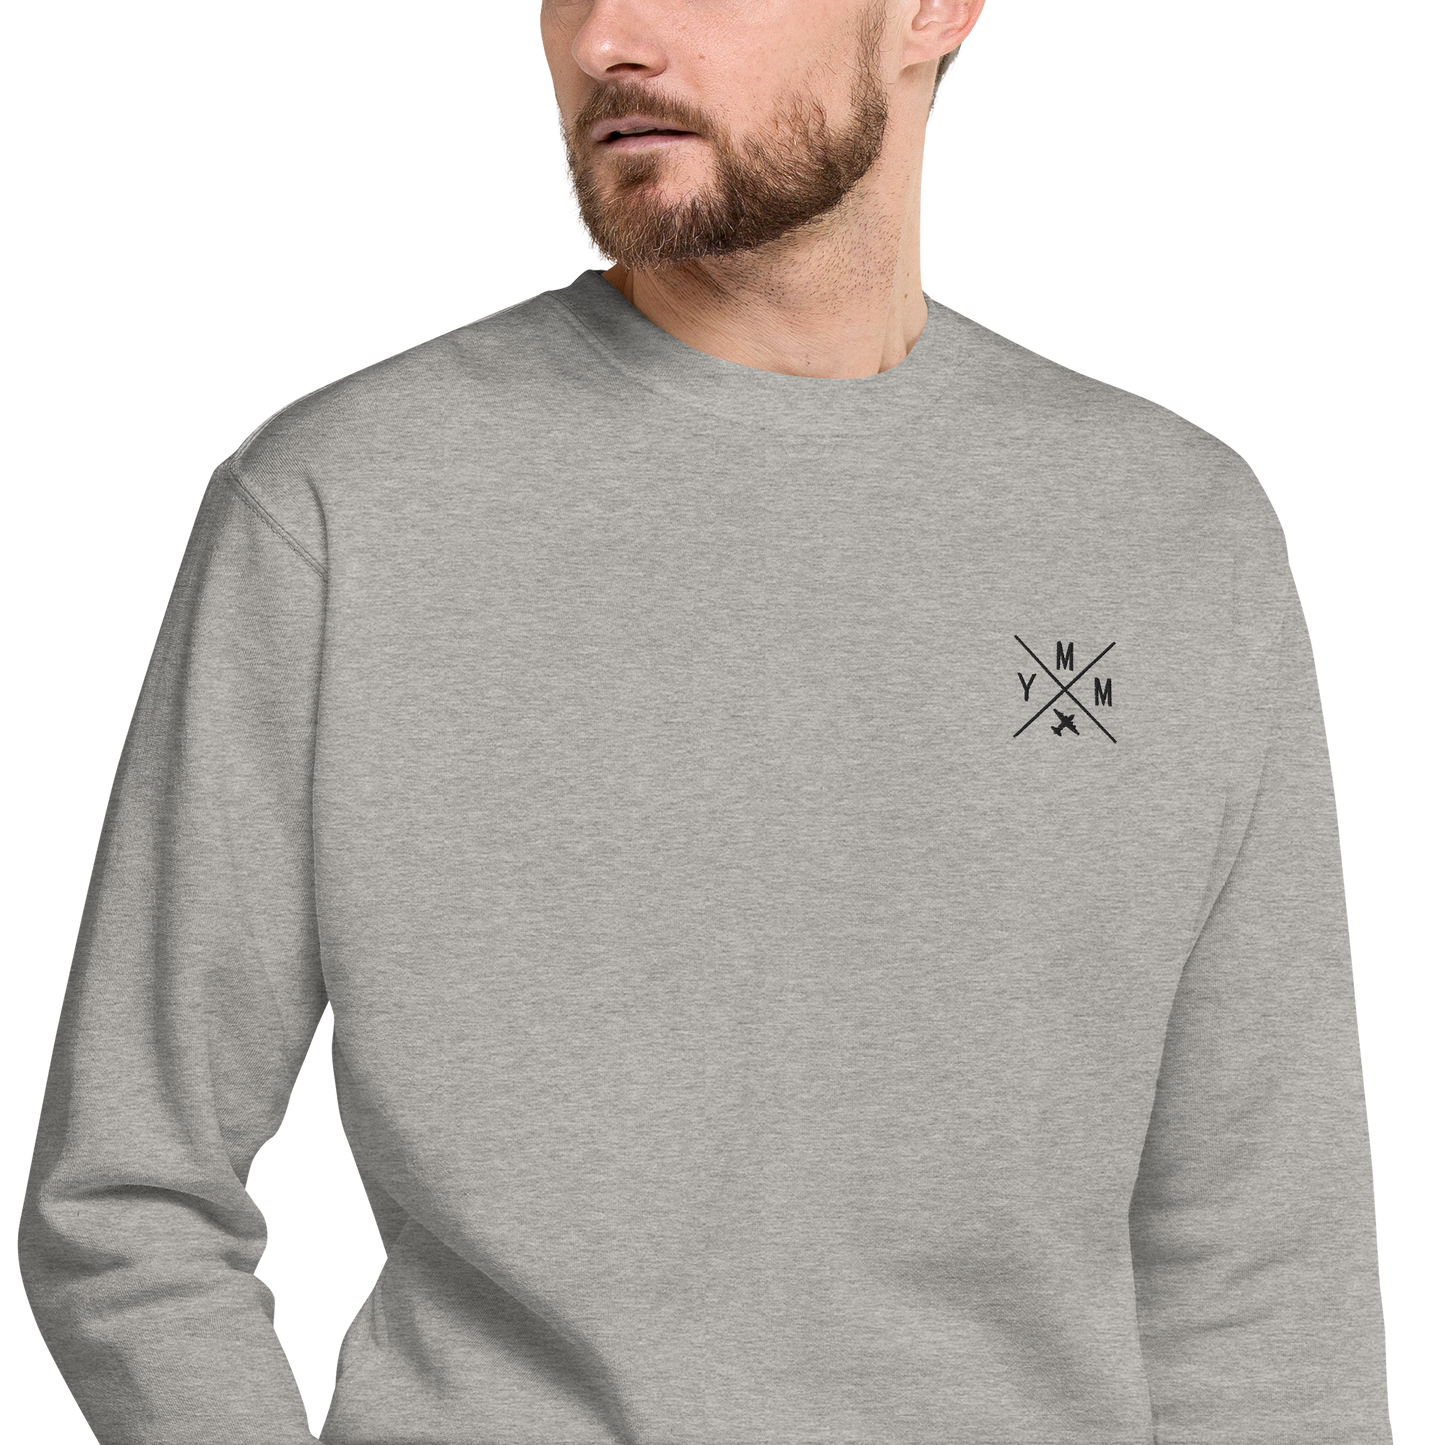 YHM Designs - YMM Fort McMurray Premium Sweatshirt - Crossed-X Design with Airport Code and Vintage Propliner - Black Embroidery - Image 09